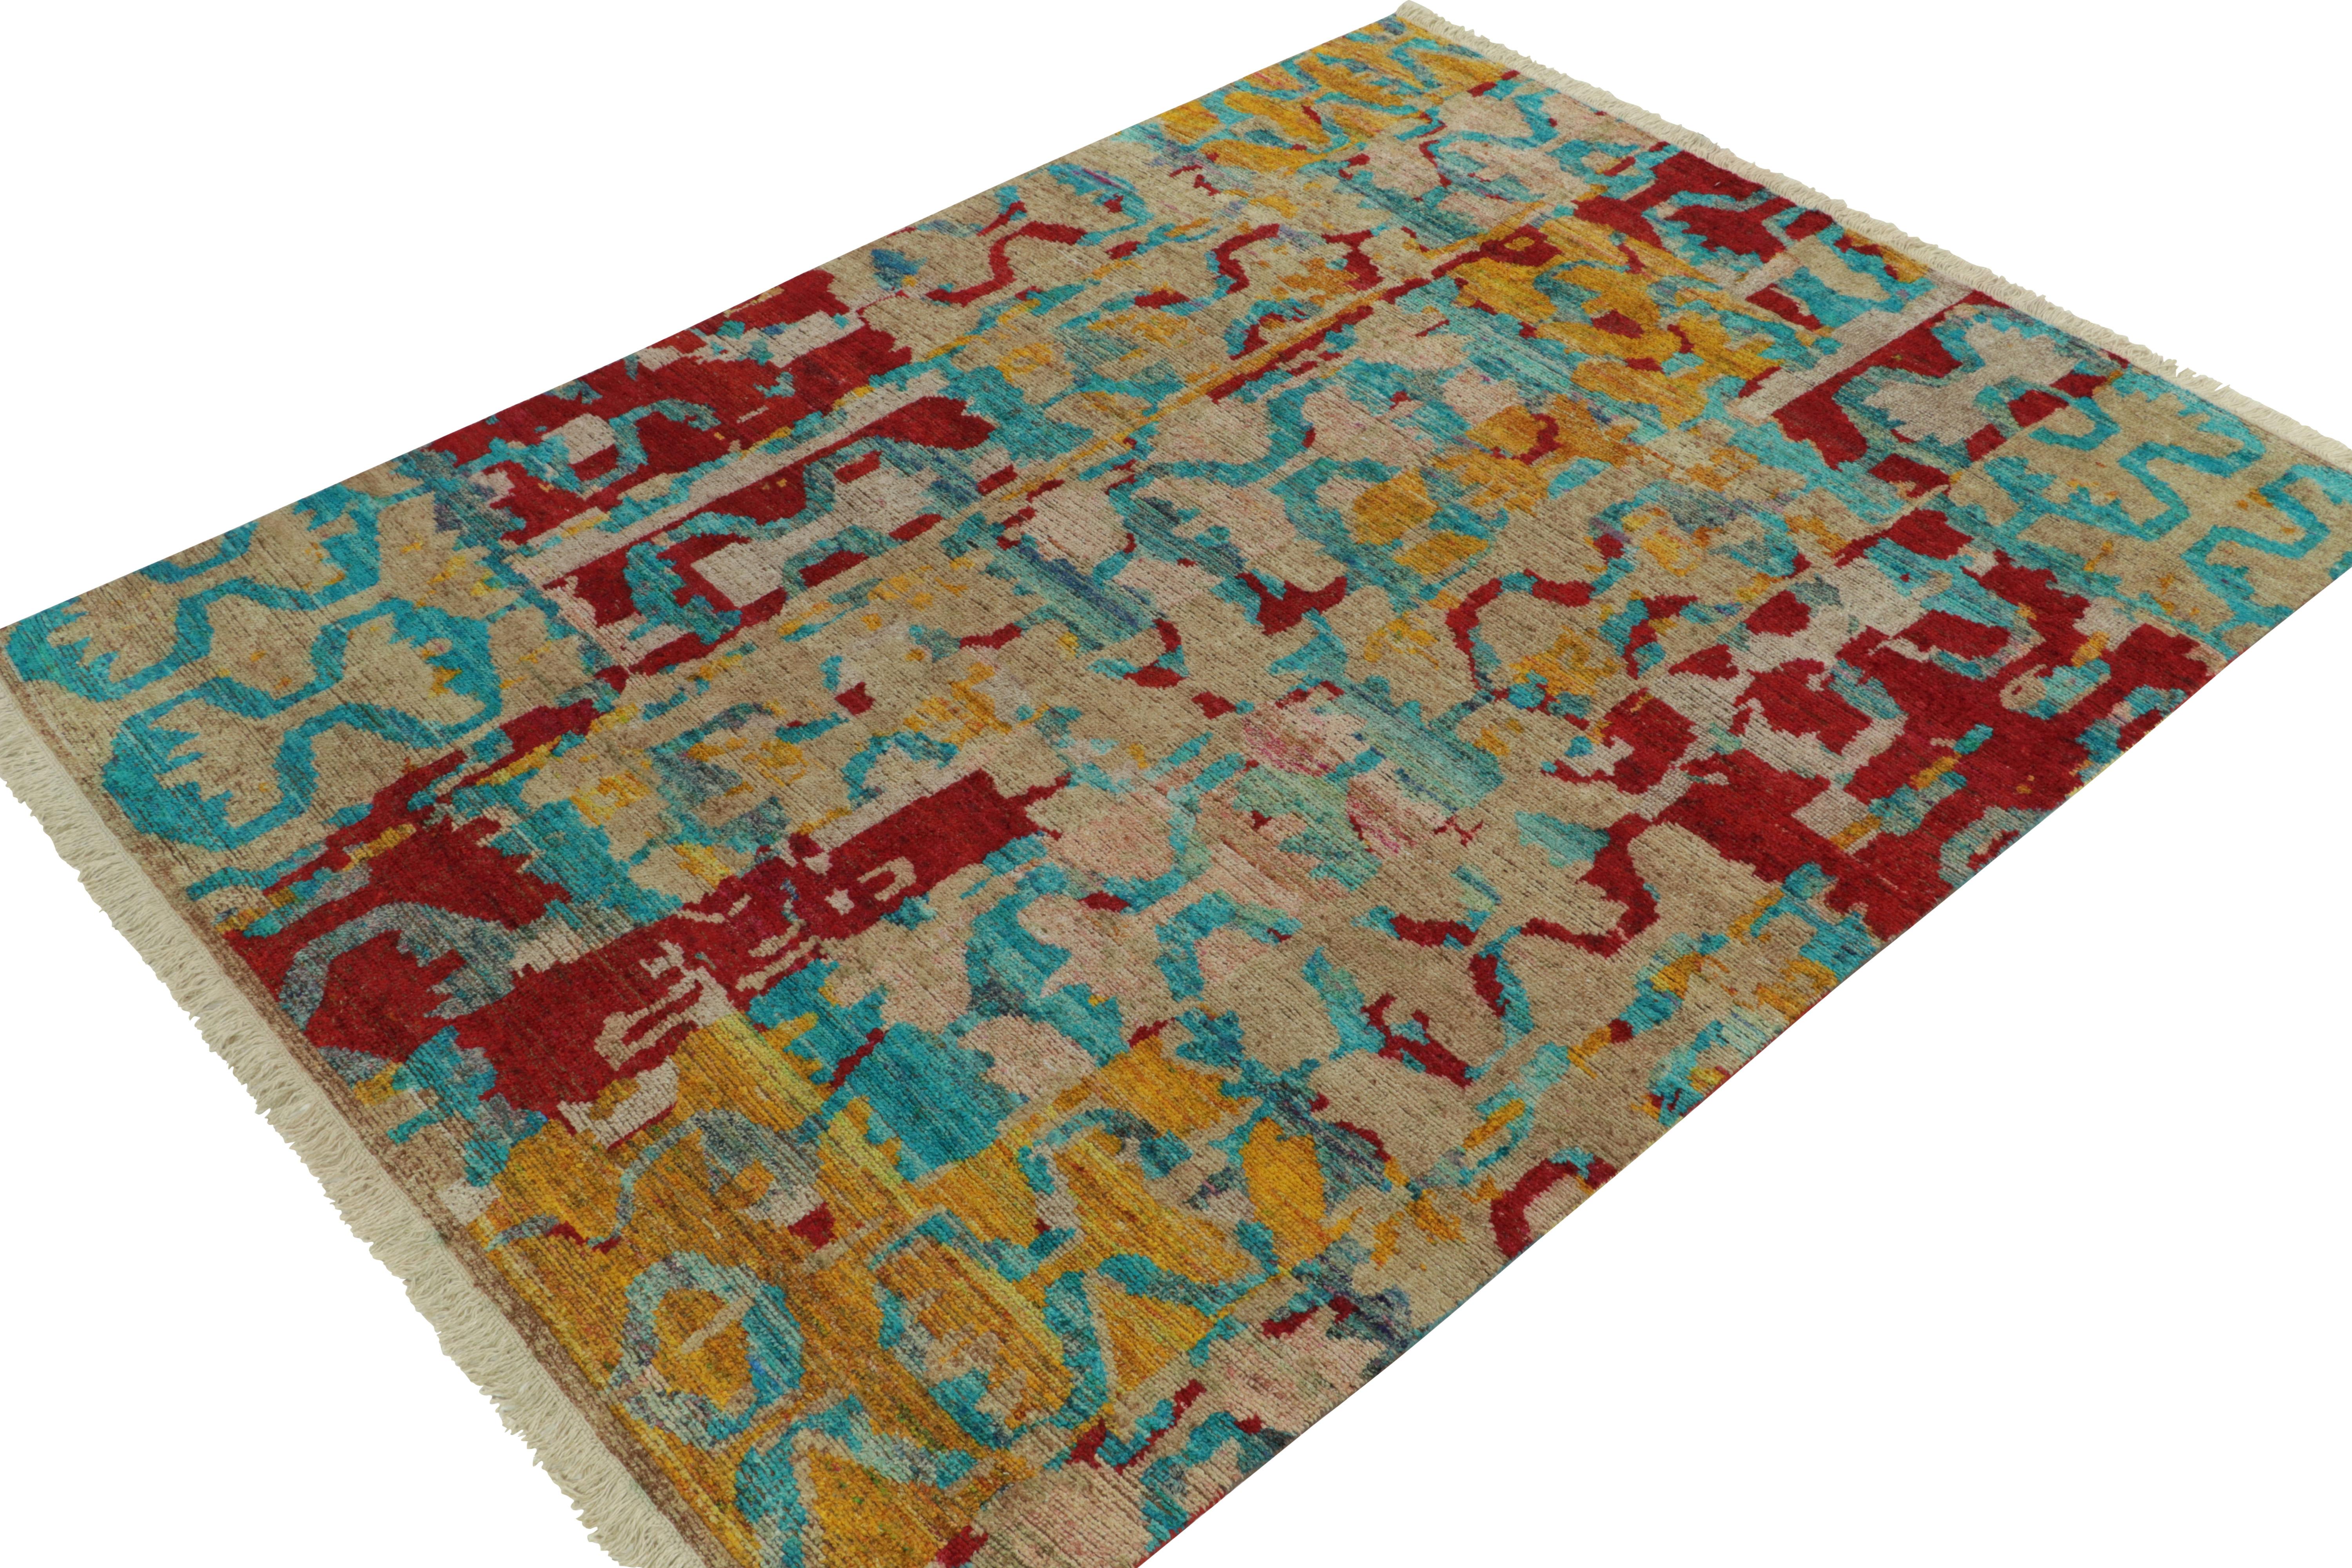 Hand-knotted in luxurious silk, a bold 8x10’6 addition to Rug & Kilim’s most intriguing modern rug selections. 

On the Design: This particular design marries abstract and Moroccan sensibilities in the most intriguing, dynamic layering of patterns